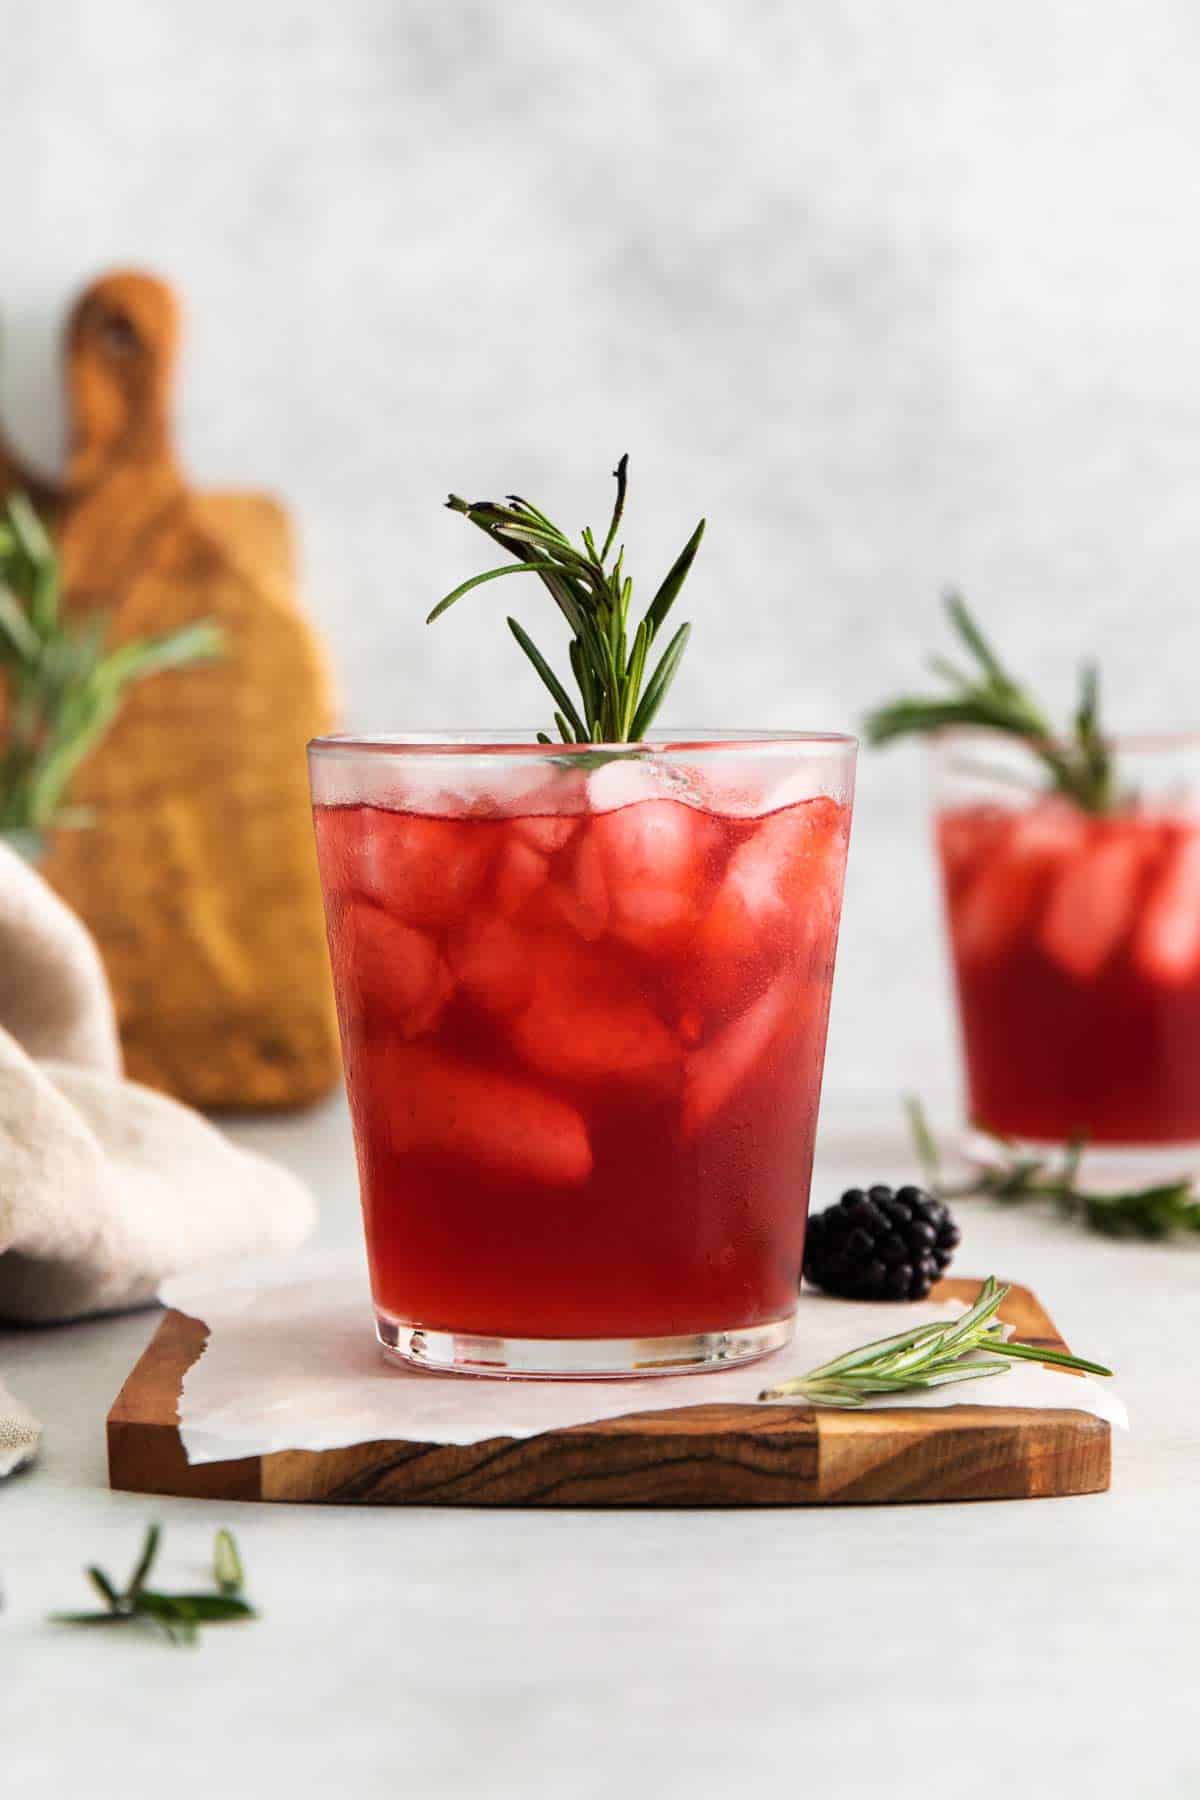 Blackberry Whiskey Sour Cocktail with Smoked Rosemary Garnish